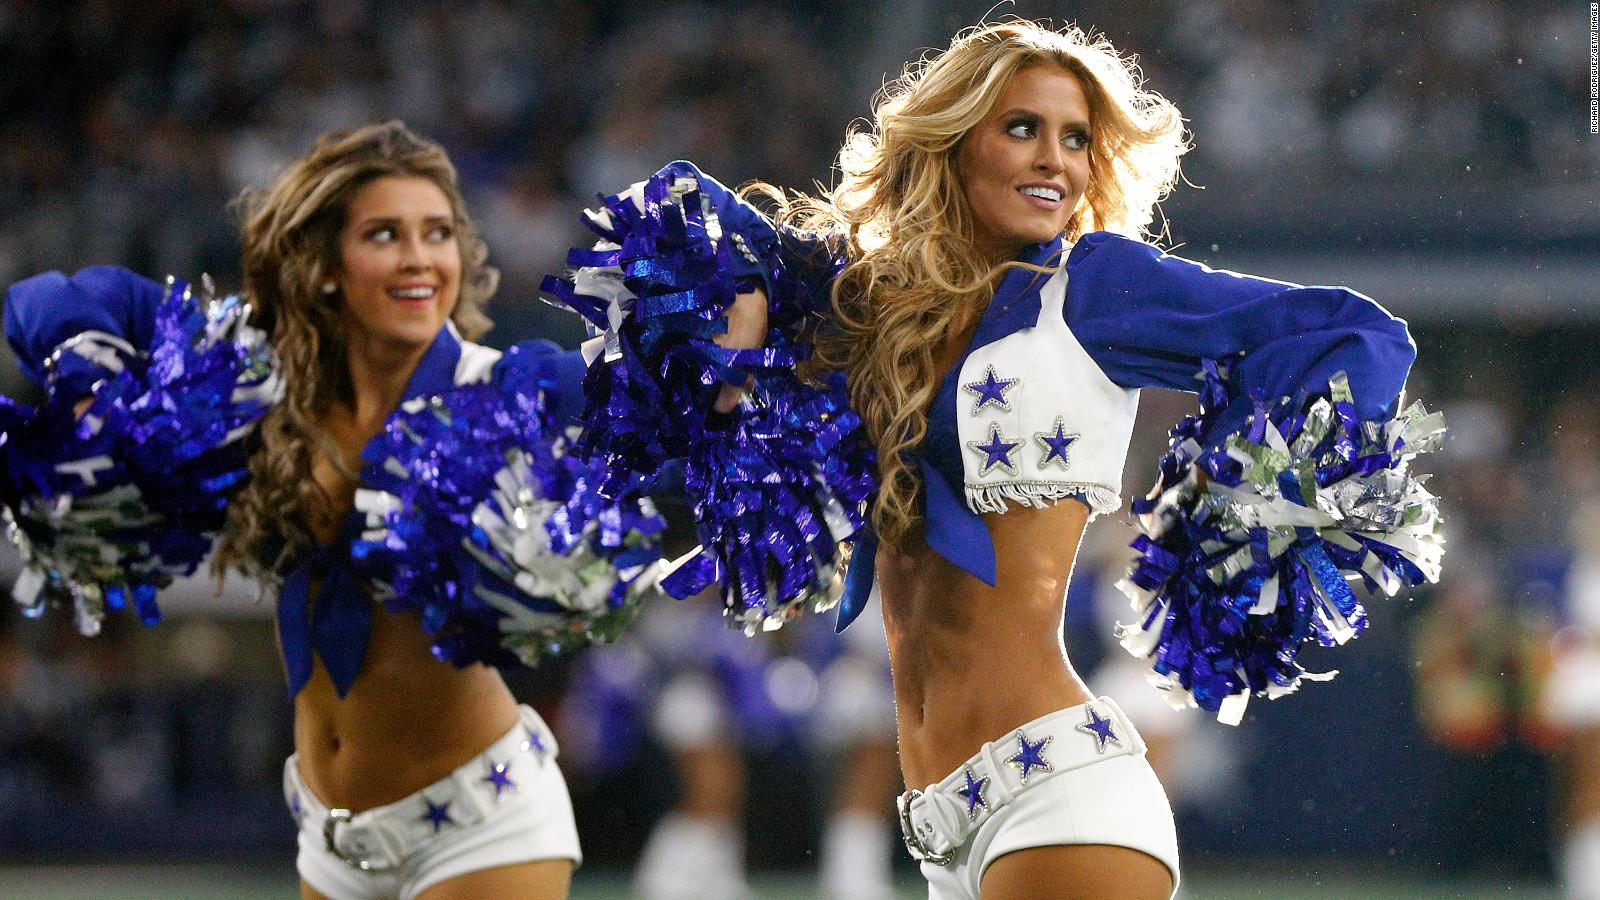 Cheerleader Sex In School - NFL cheer uniforms have been scrutinized since the 1970s, but critics might  be missing the point - CNN Style